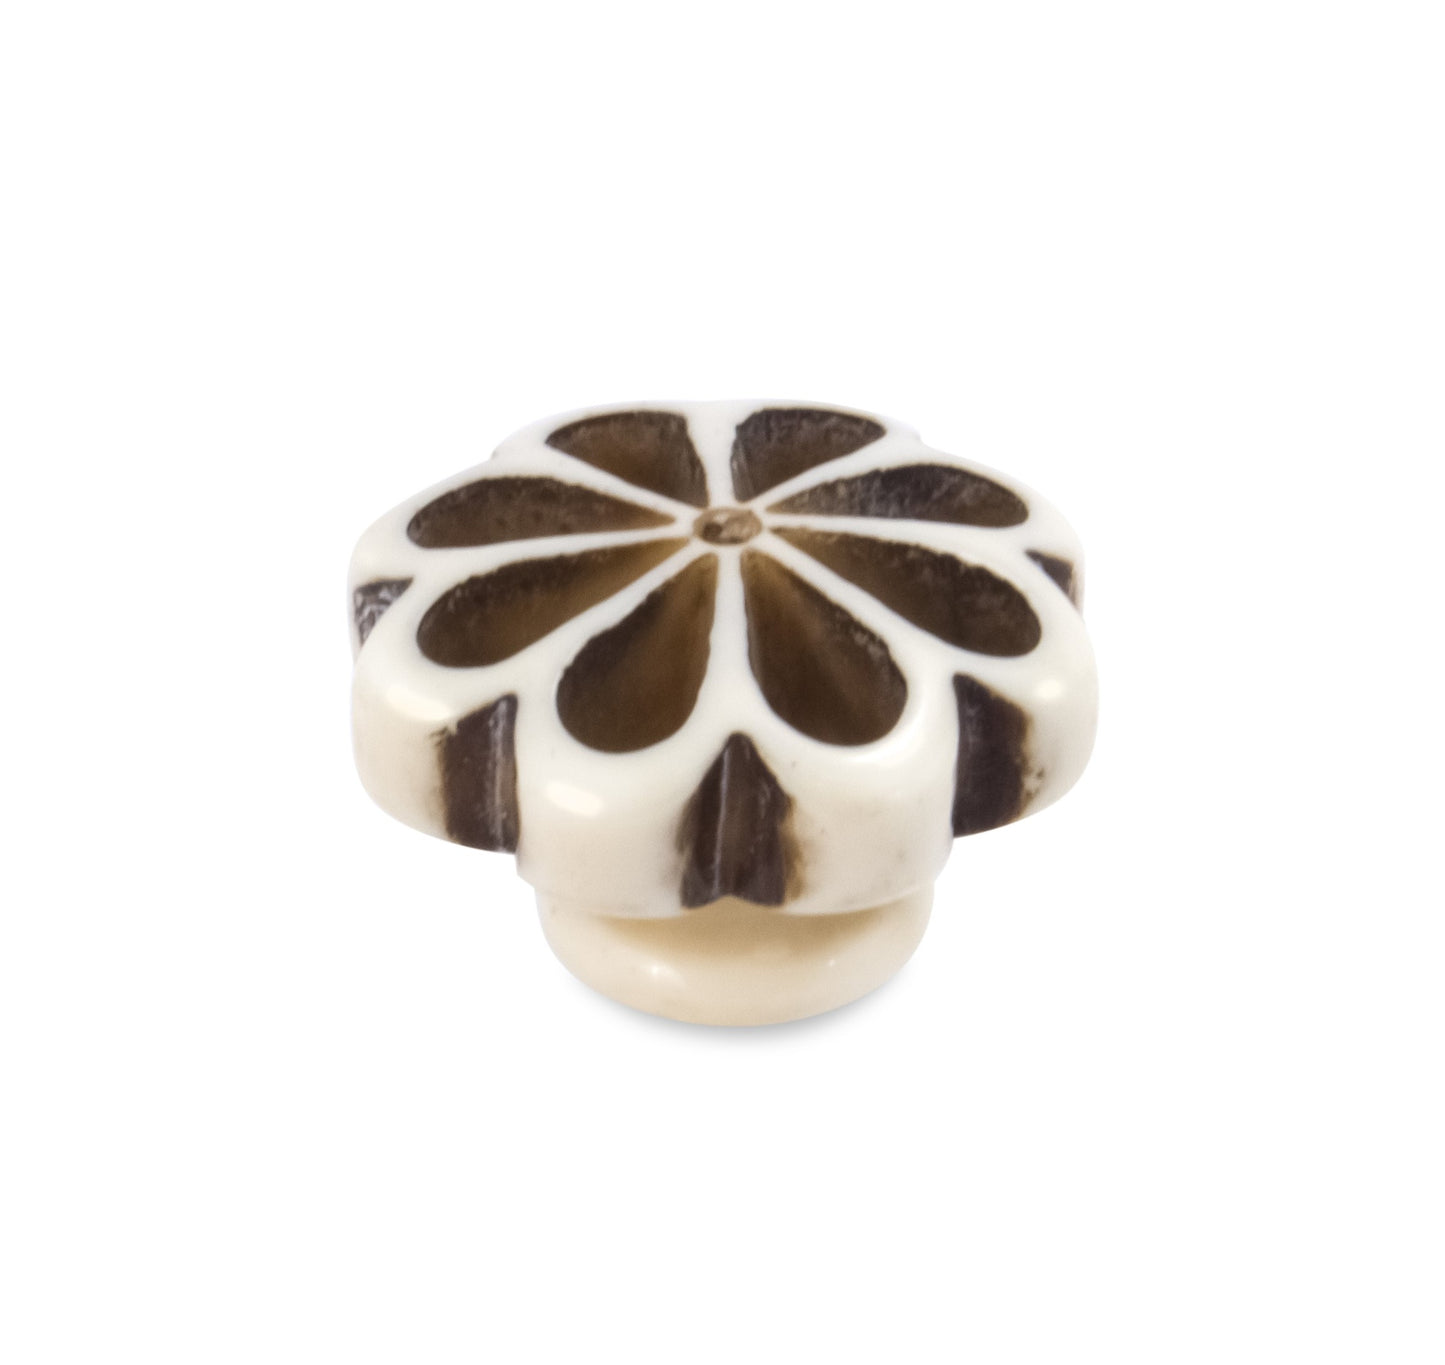 Mascot Hardware Hand Crafted Resin 1-3/8 in. Cream & Black Cabinet Knob